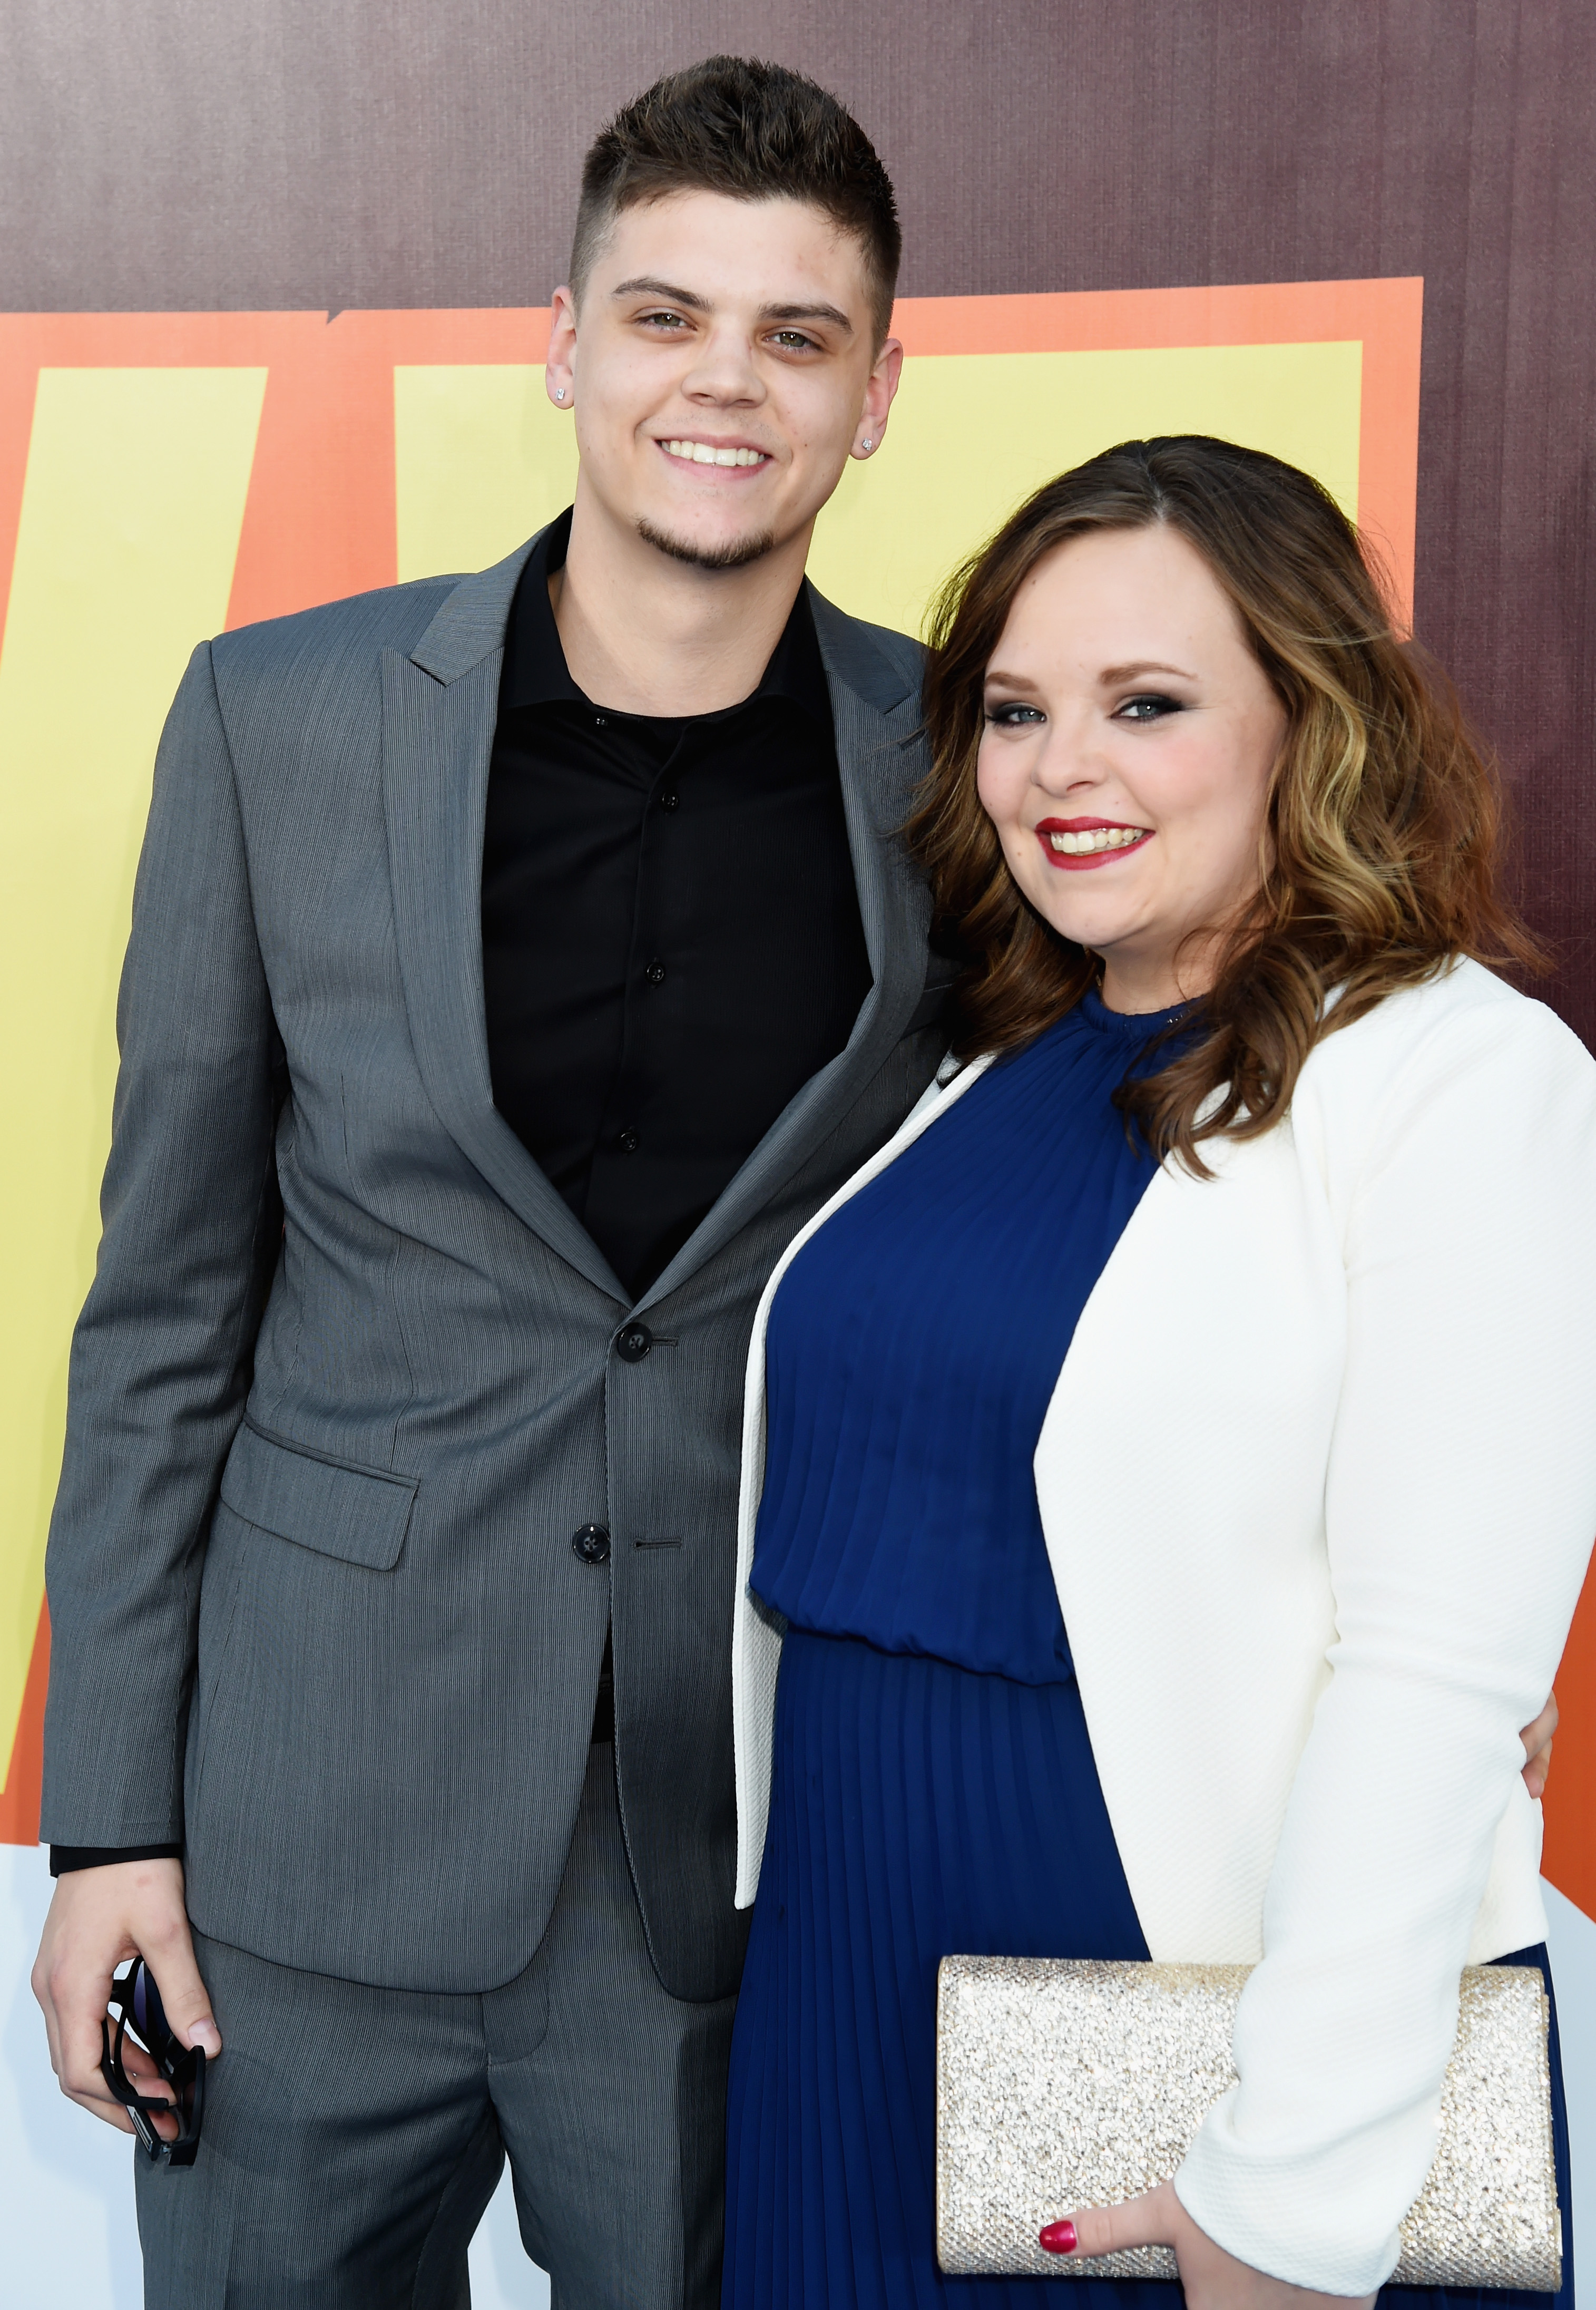 TV personalities Tyler Baltierra and Catelynn Lowell attend the 2015 MTV Movie Awards on April 12, 2015 in Los Angeles. (Jeff Kravitz—FilmMagic)